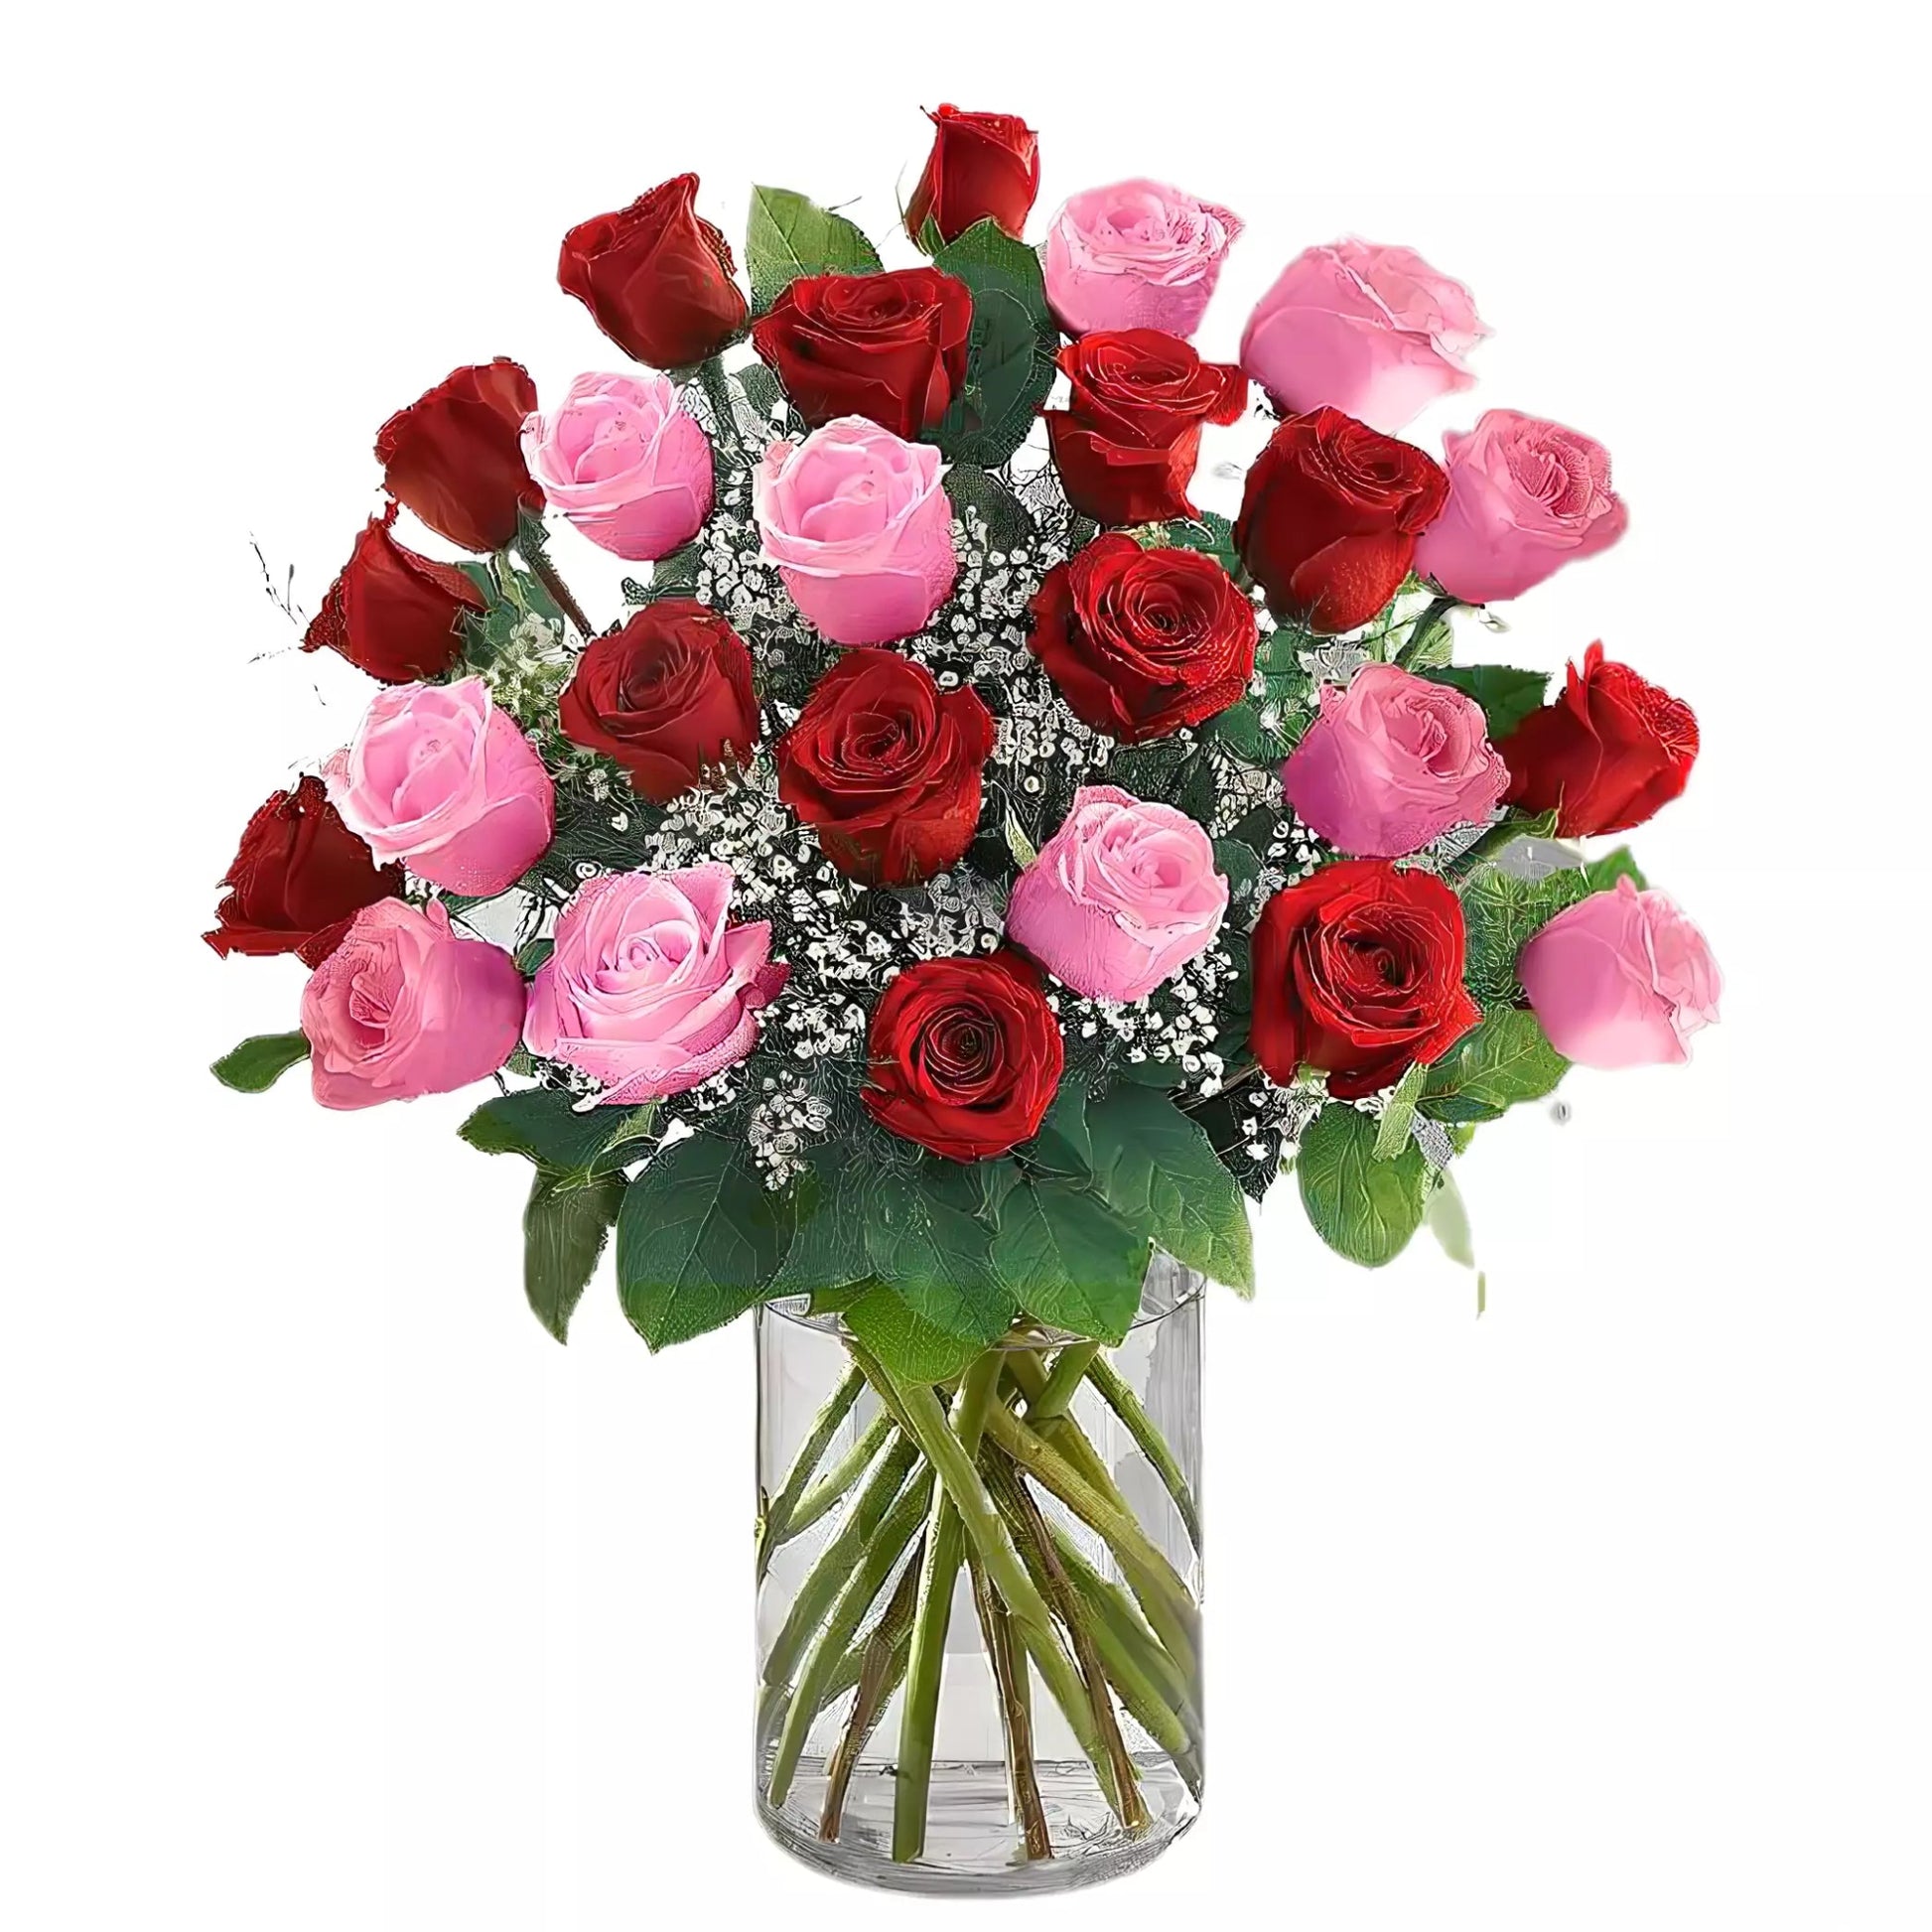 Premium Long Stem - 24 Pink & Red Roses - Fresh Cut Flowers - Queens Flower Delivery